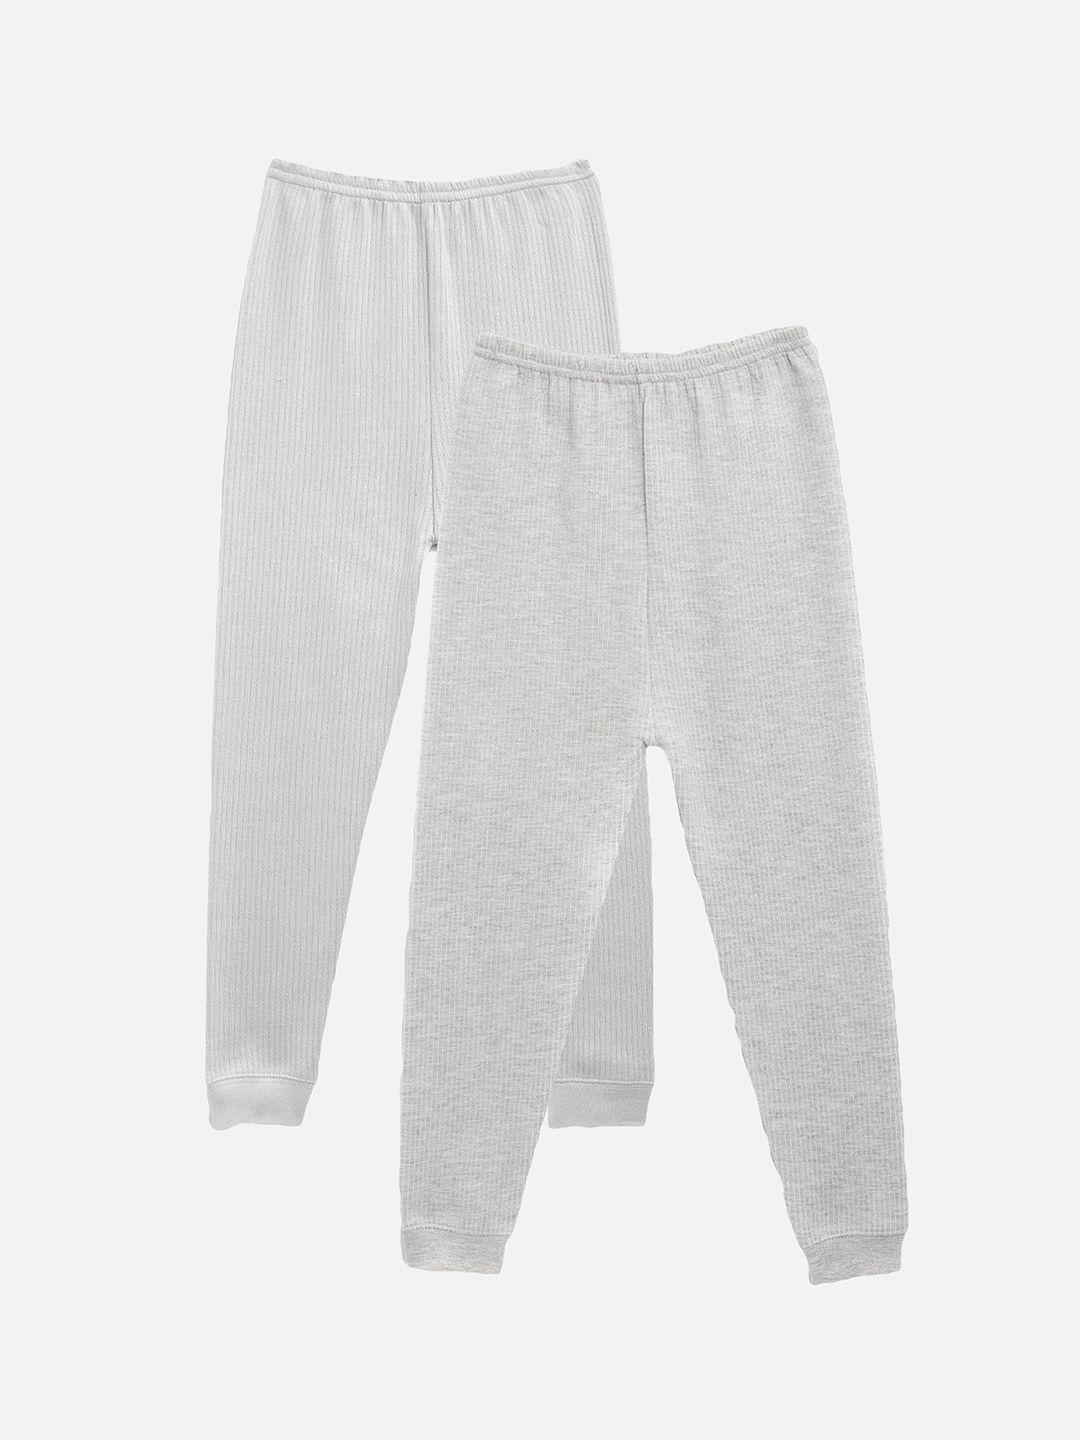 kanvin boys pack of 2 grey thermal bottoms